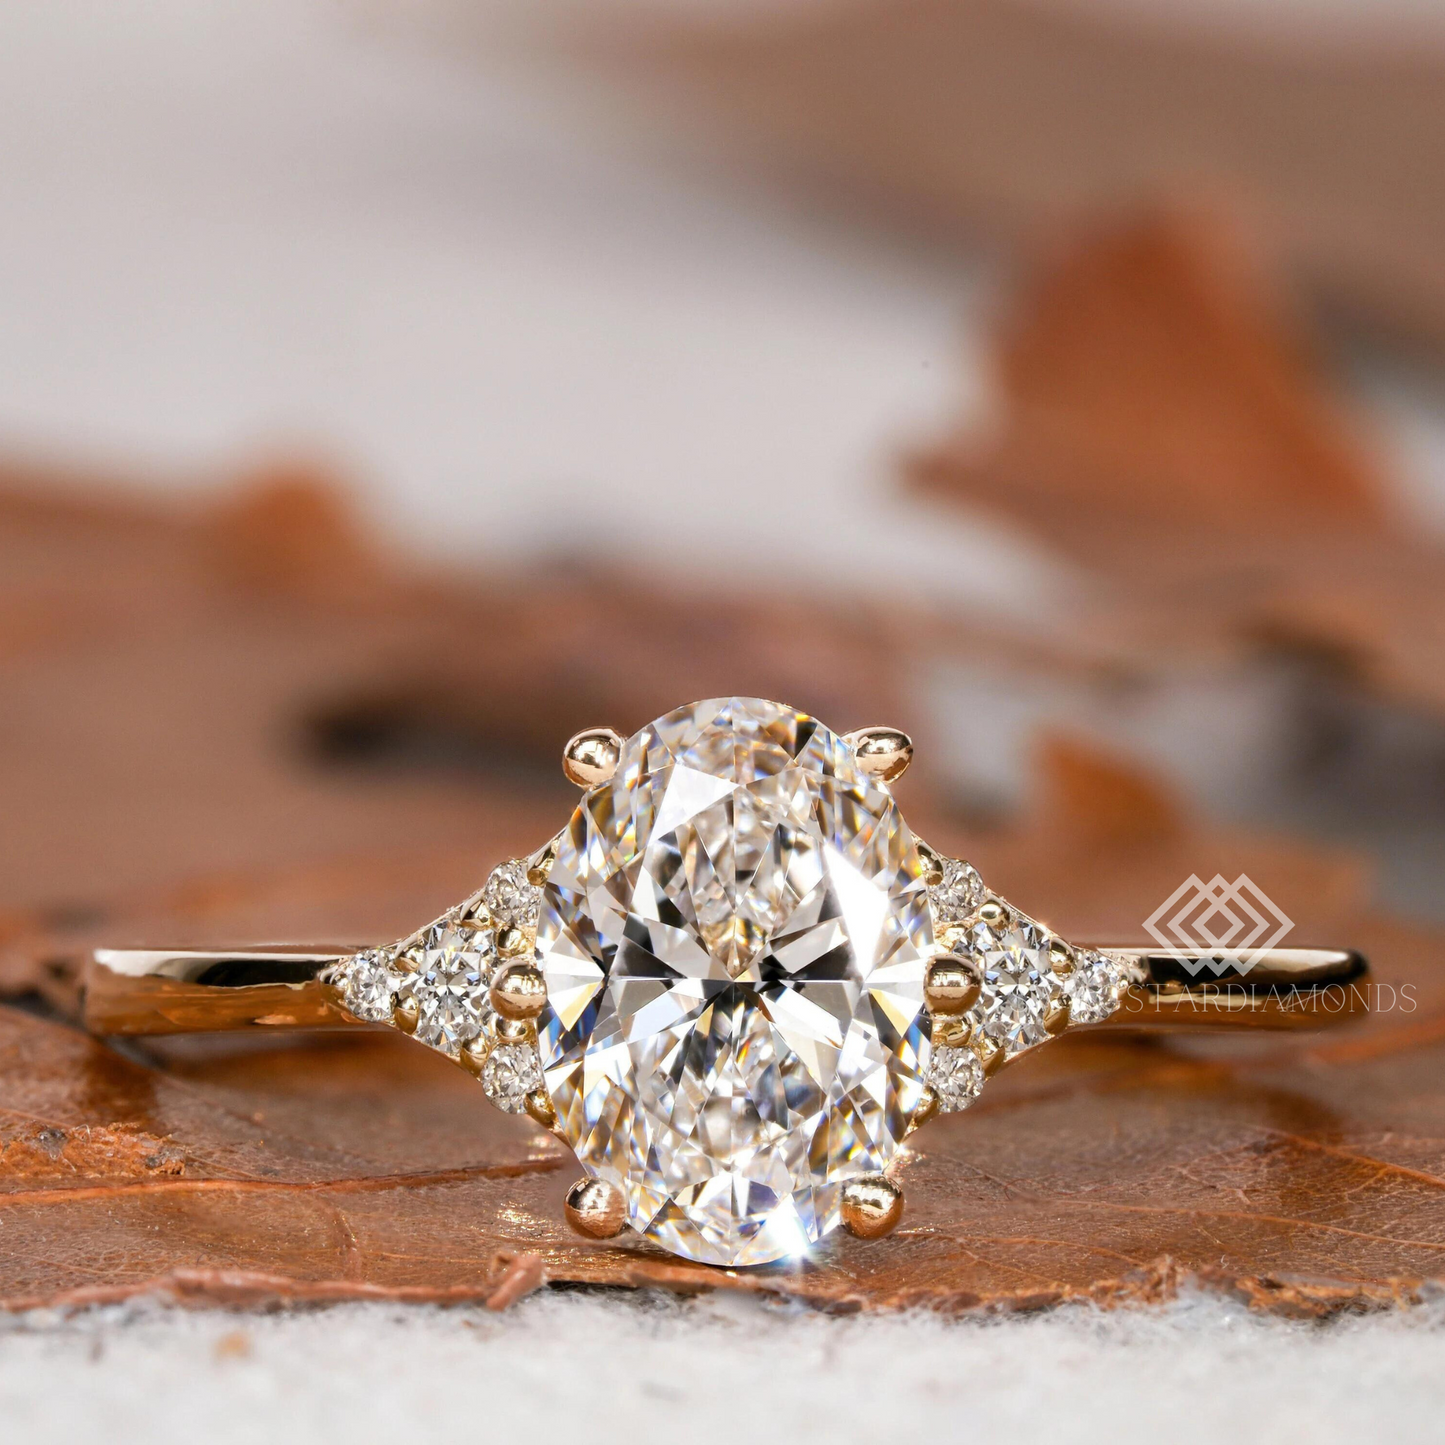 Oval Cut Ring With Lab-Grown & Natural Diamonds, Jewelry By Leading Manufacturer From Swagstar, Surat. Explore Wedding, Engagement, Eternity Rings, Earring & Studs, Bracelets In 10k, 14k, & 18k Gold Varieties, Including White, Yellow, Rose Gold.